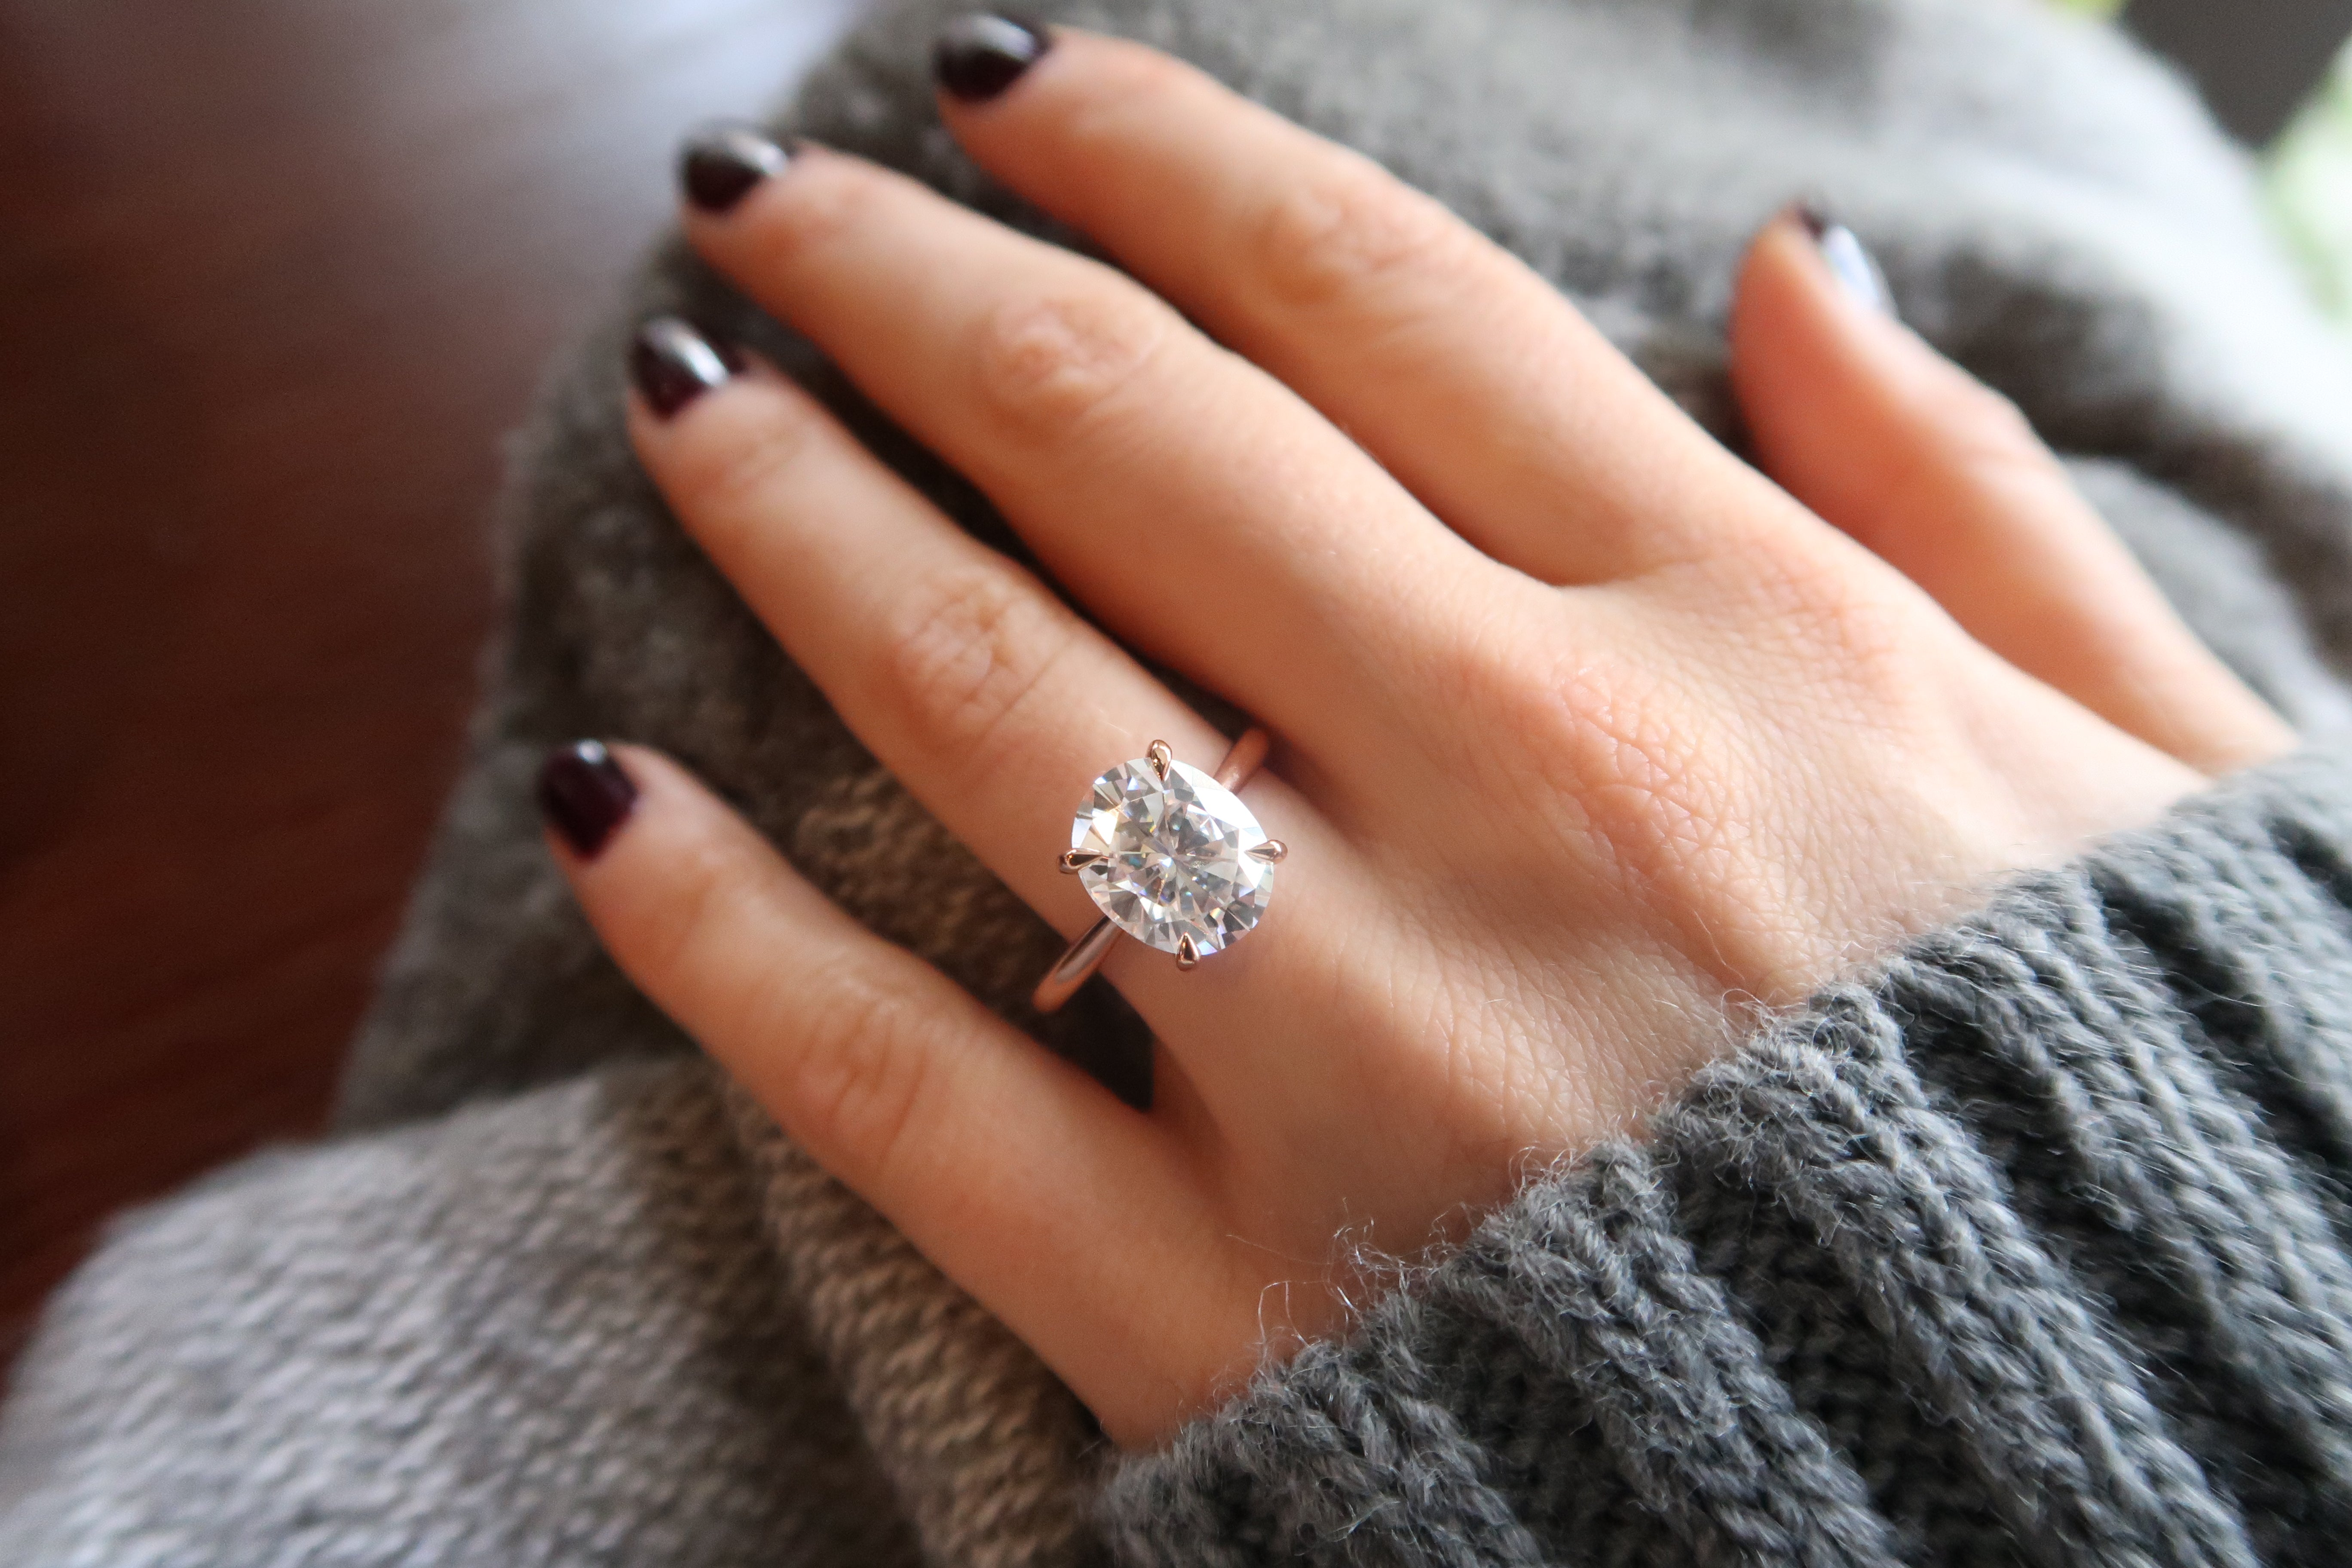 Is there a downside to Moissanite?